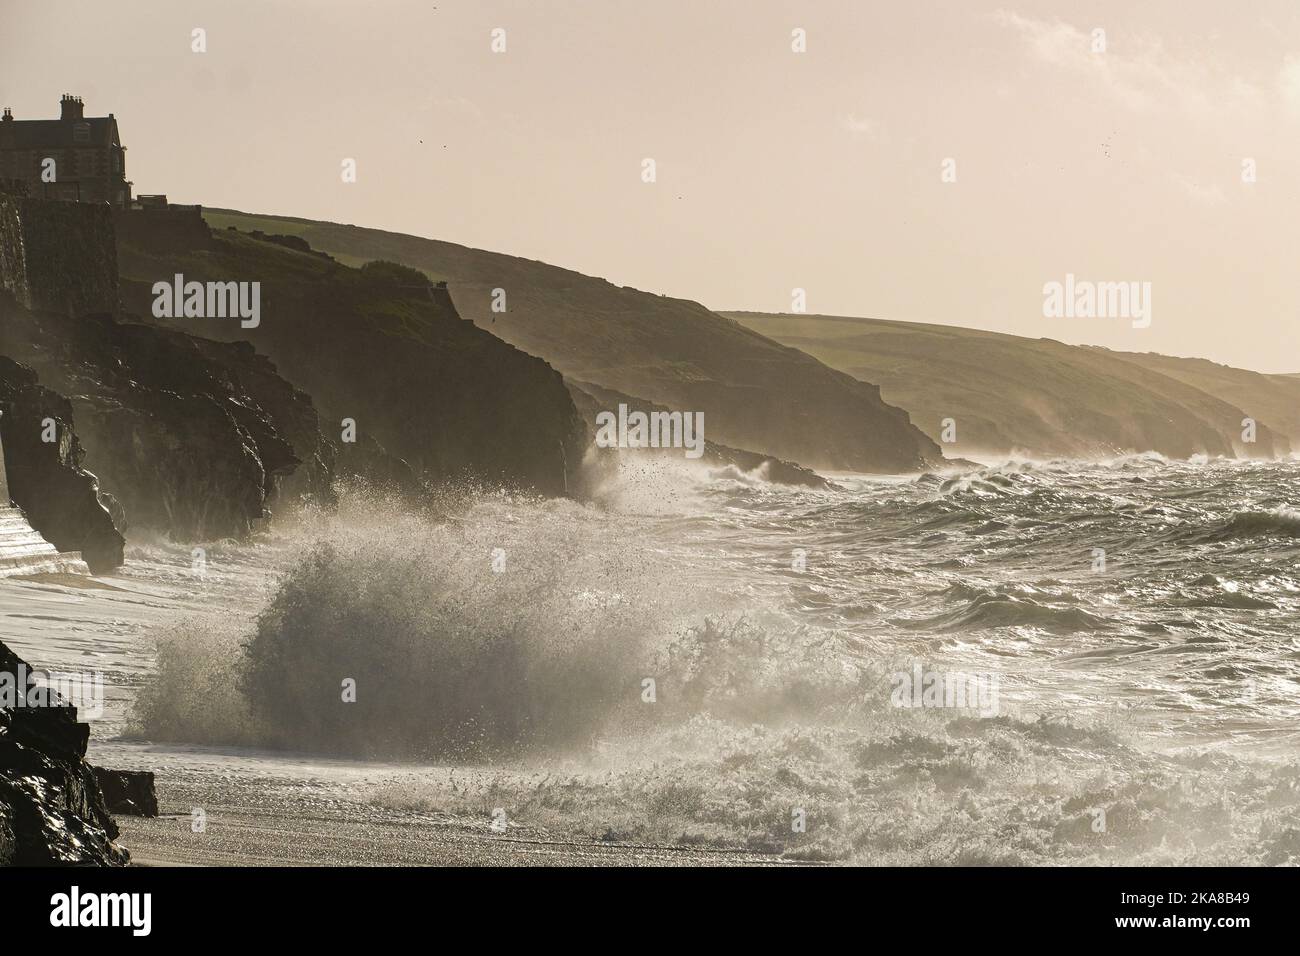 Porthleven, Cornwall, UK. 1st November 2022. UK Weather. Storm Claudio continues to batter the coastline of Cornwall, after gale force winds overnight, with waves crashing into the coast at Porthleven. Credit Simon Maycock / Alamy Live News. Stock Photo